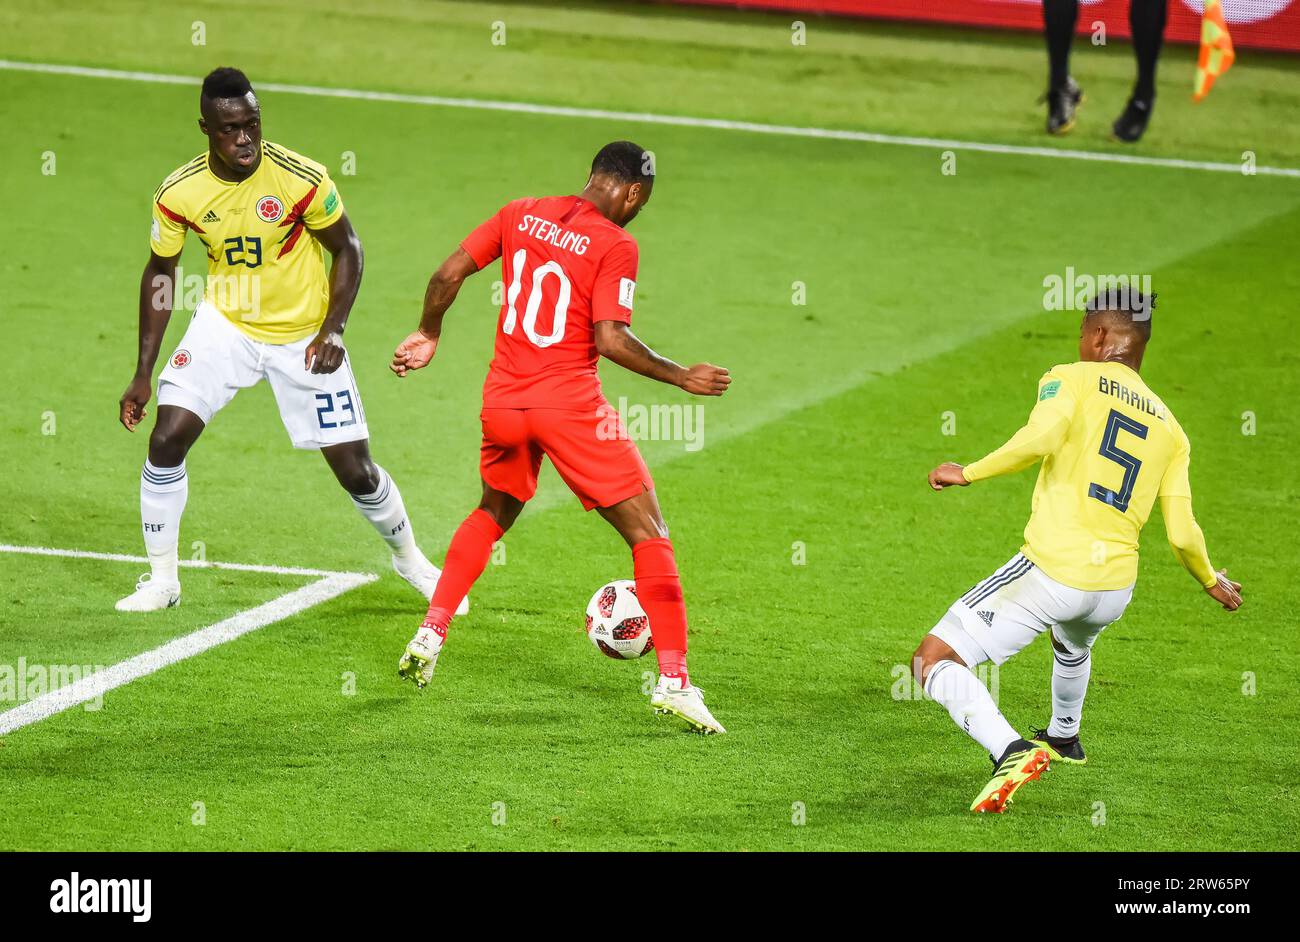 Moscow, Russia – July 3, 2018. England national football team midfielder Raheem Sterlin against Colombia players Davinson Sanchez and Wilmar Barrios d Stock Photo